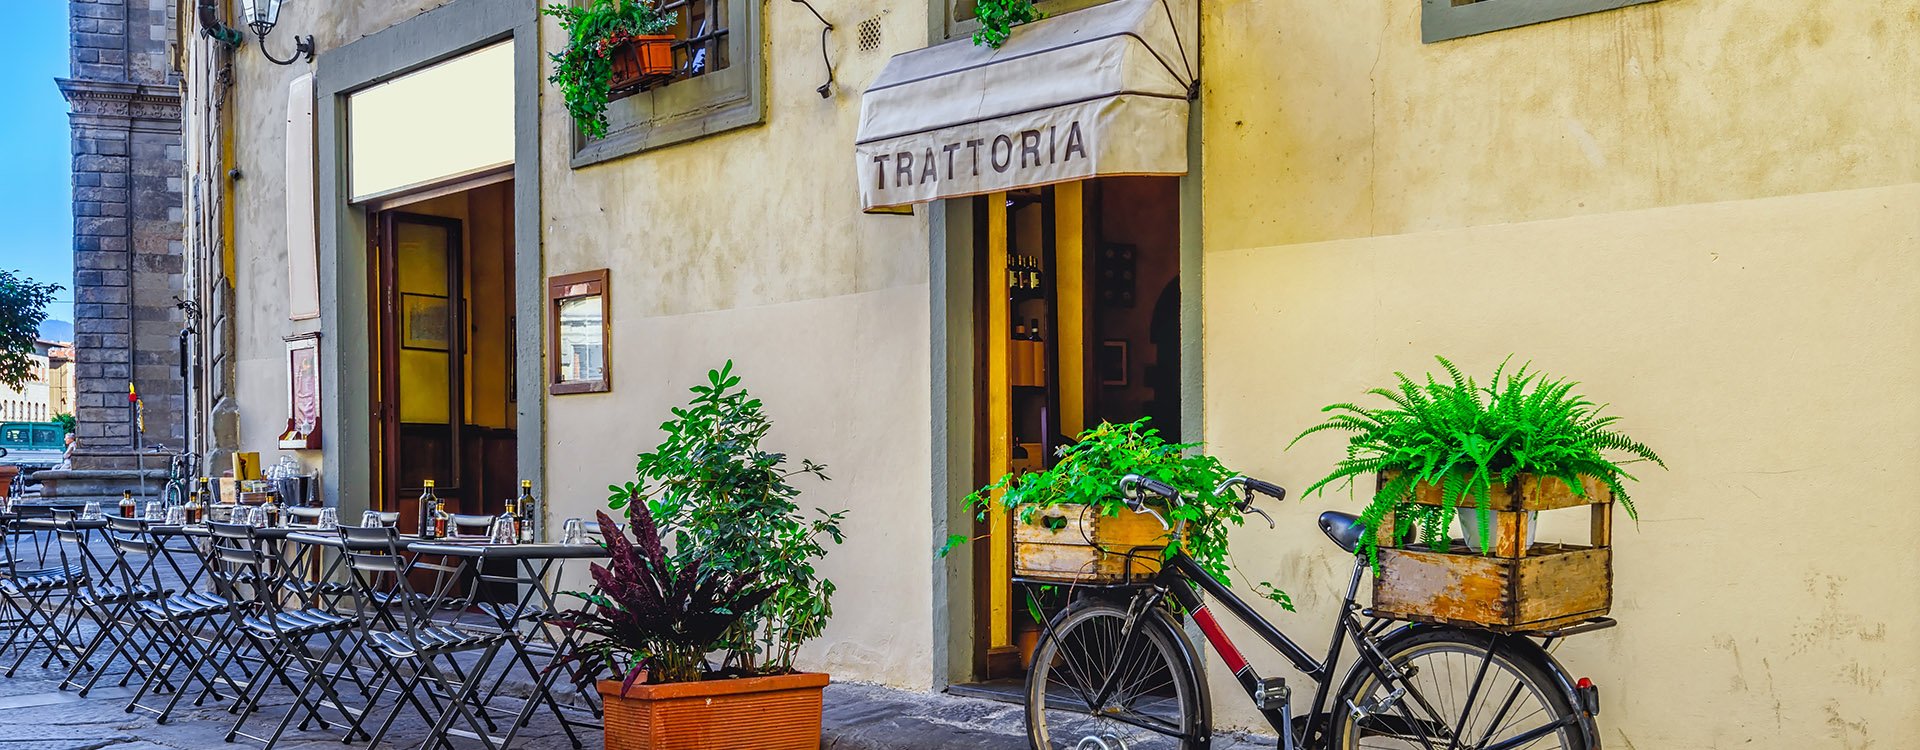 trattoria in Florence, Tuscany, Italy